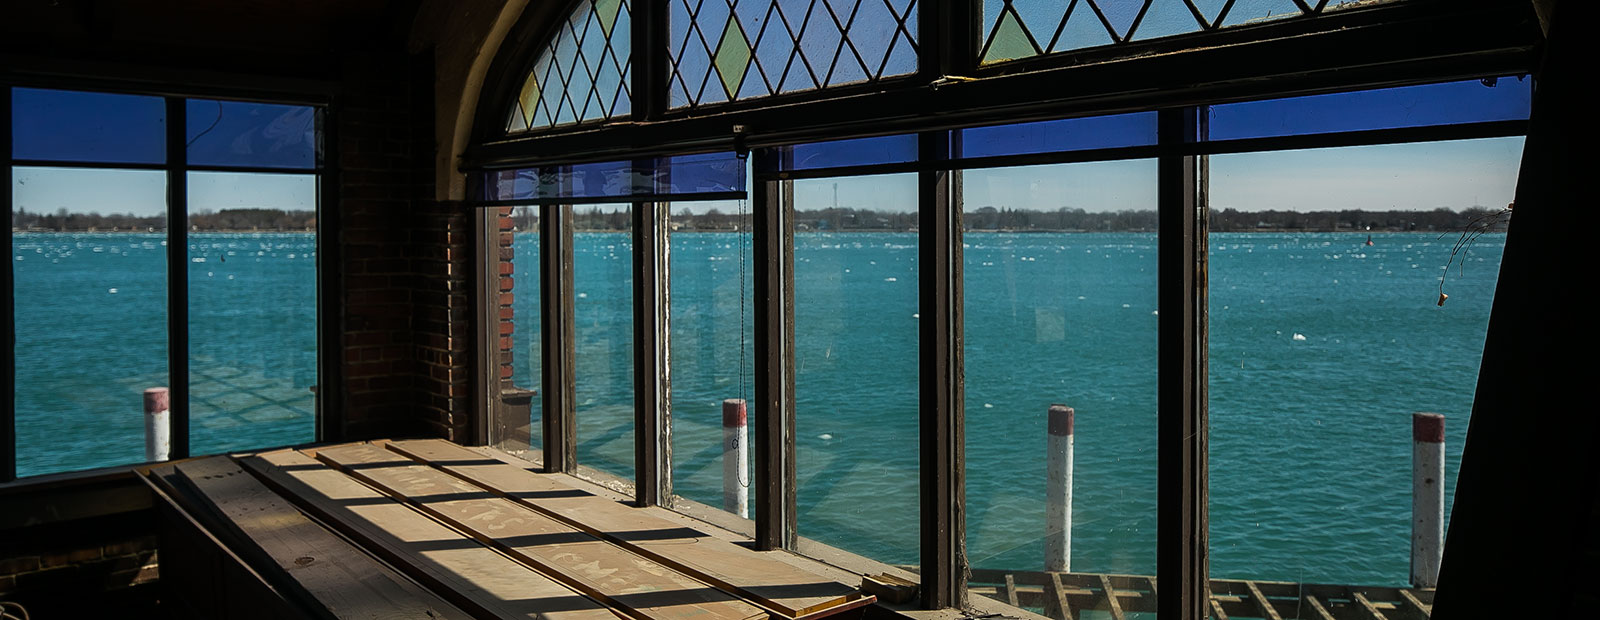 Visitors to the St. Clair Inn will enjoy breathtaking views of the water.